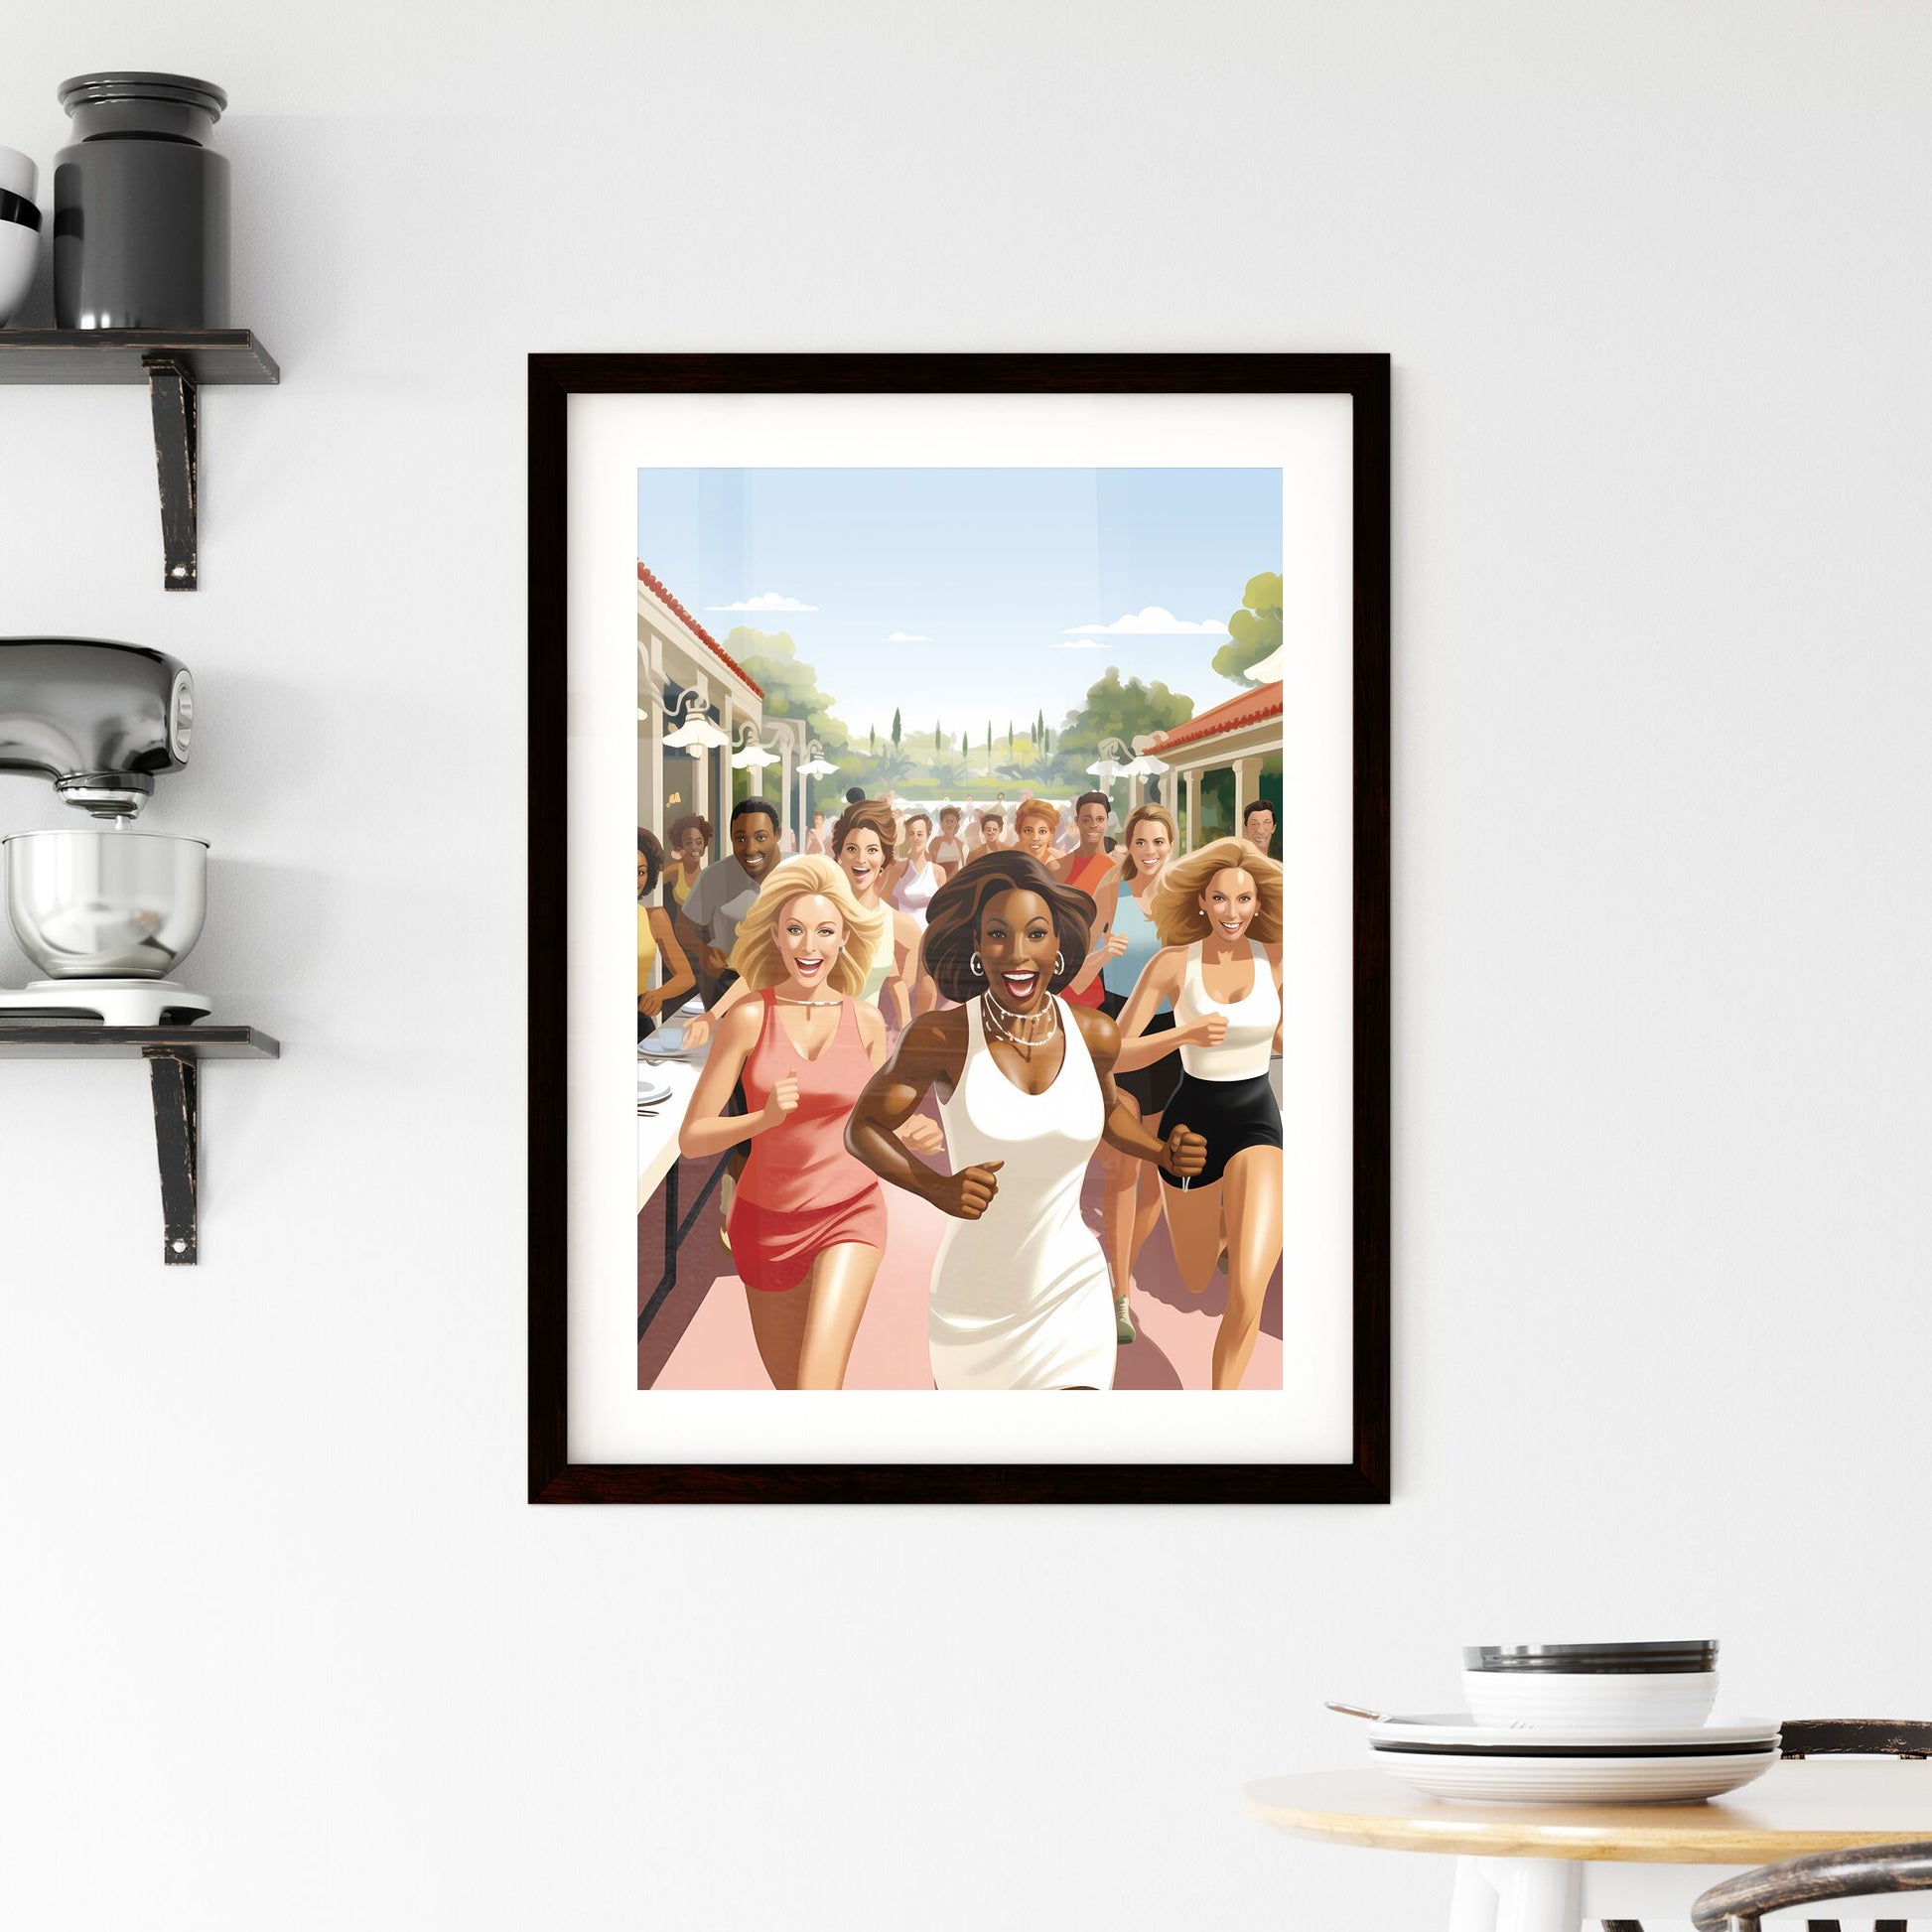 You_re buzzing like an Olympian today! - Art print of a group of people running Default Title